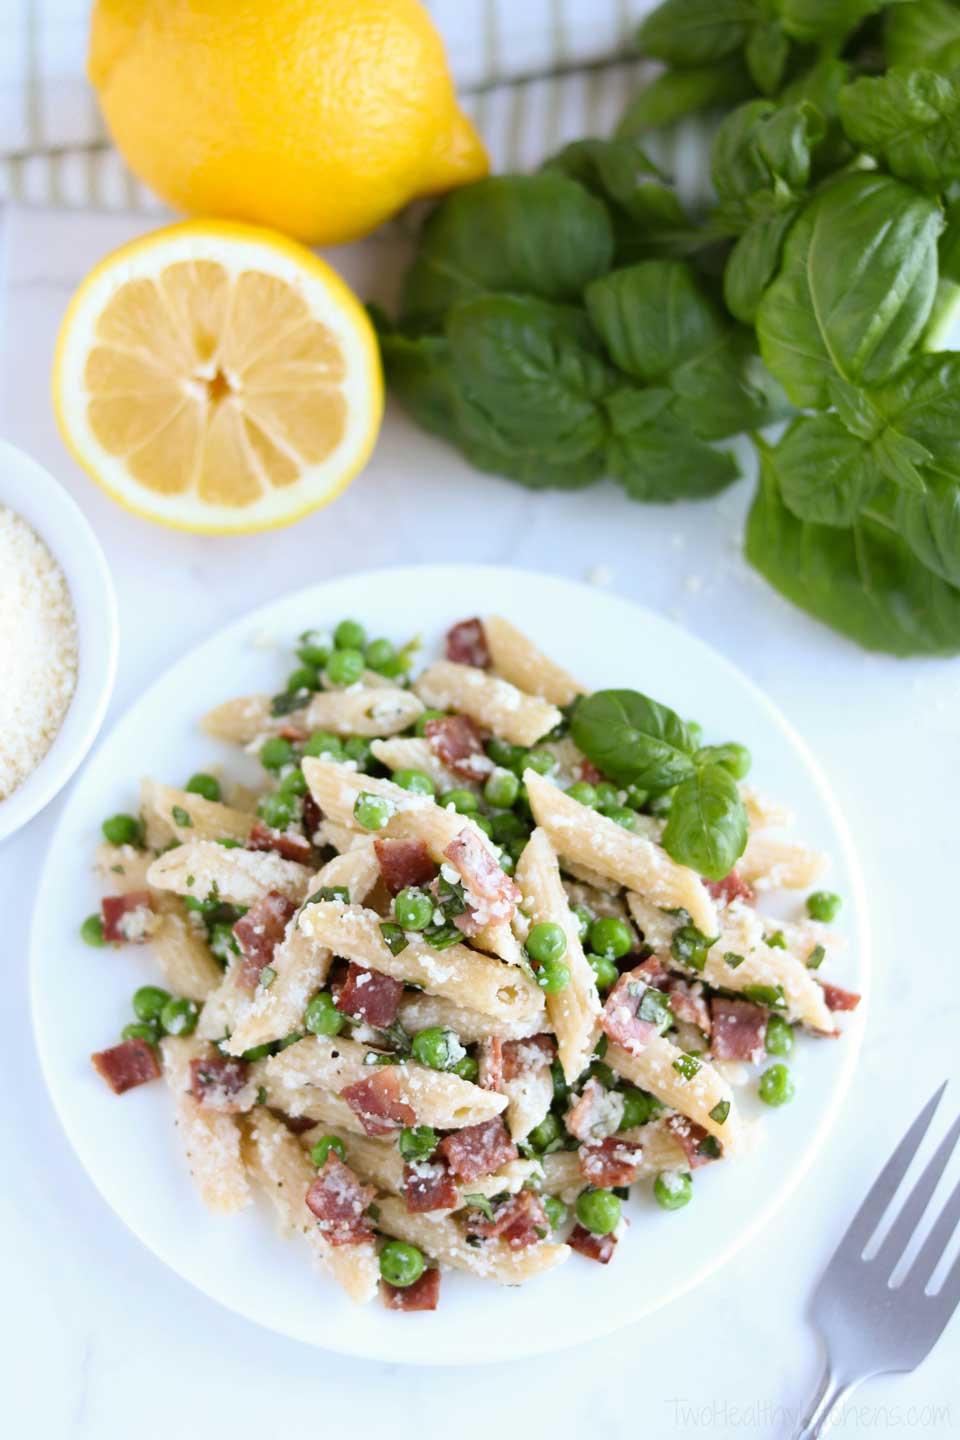 Trust me – your family will be asking you to make this Healthy Pasta with Peas and Bacon again and again! It’s a true family favorite!